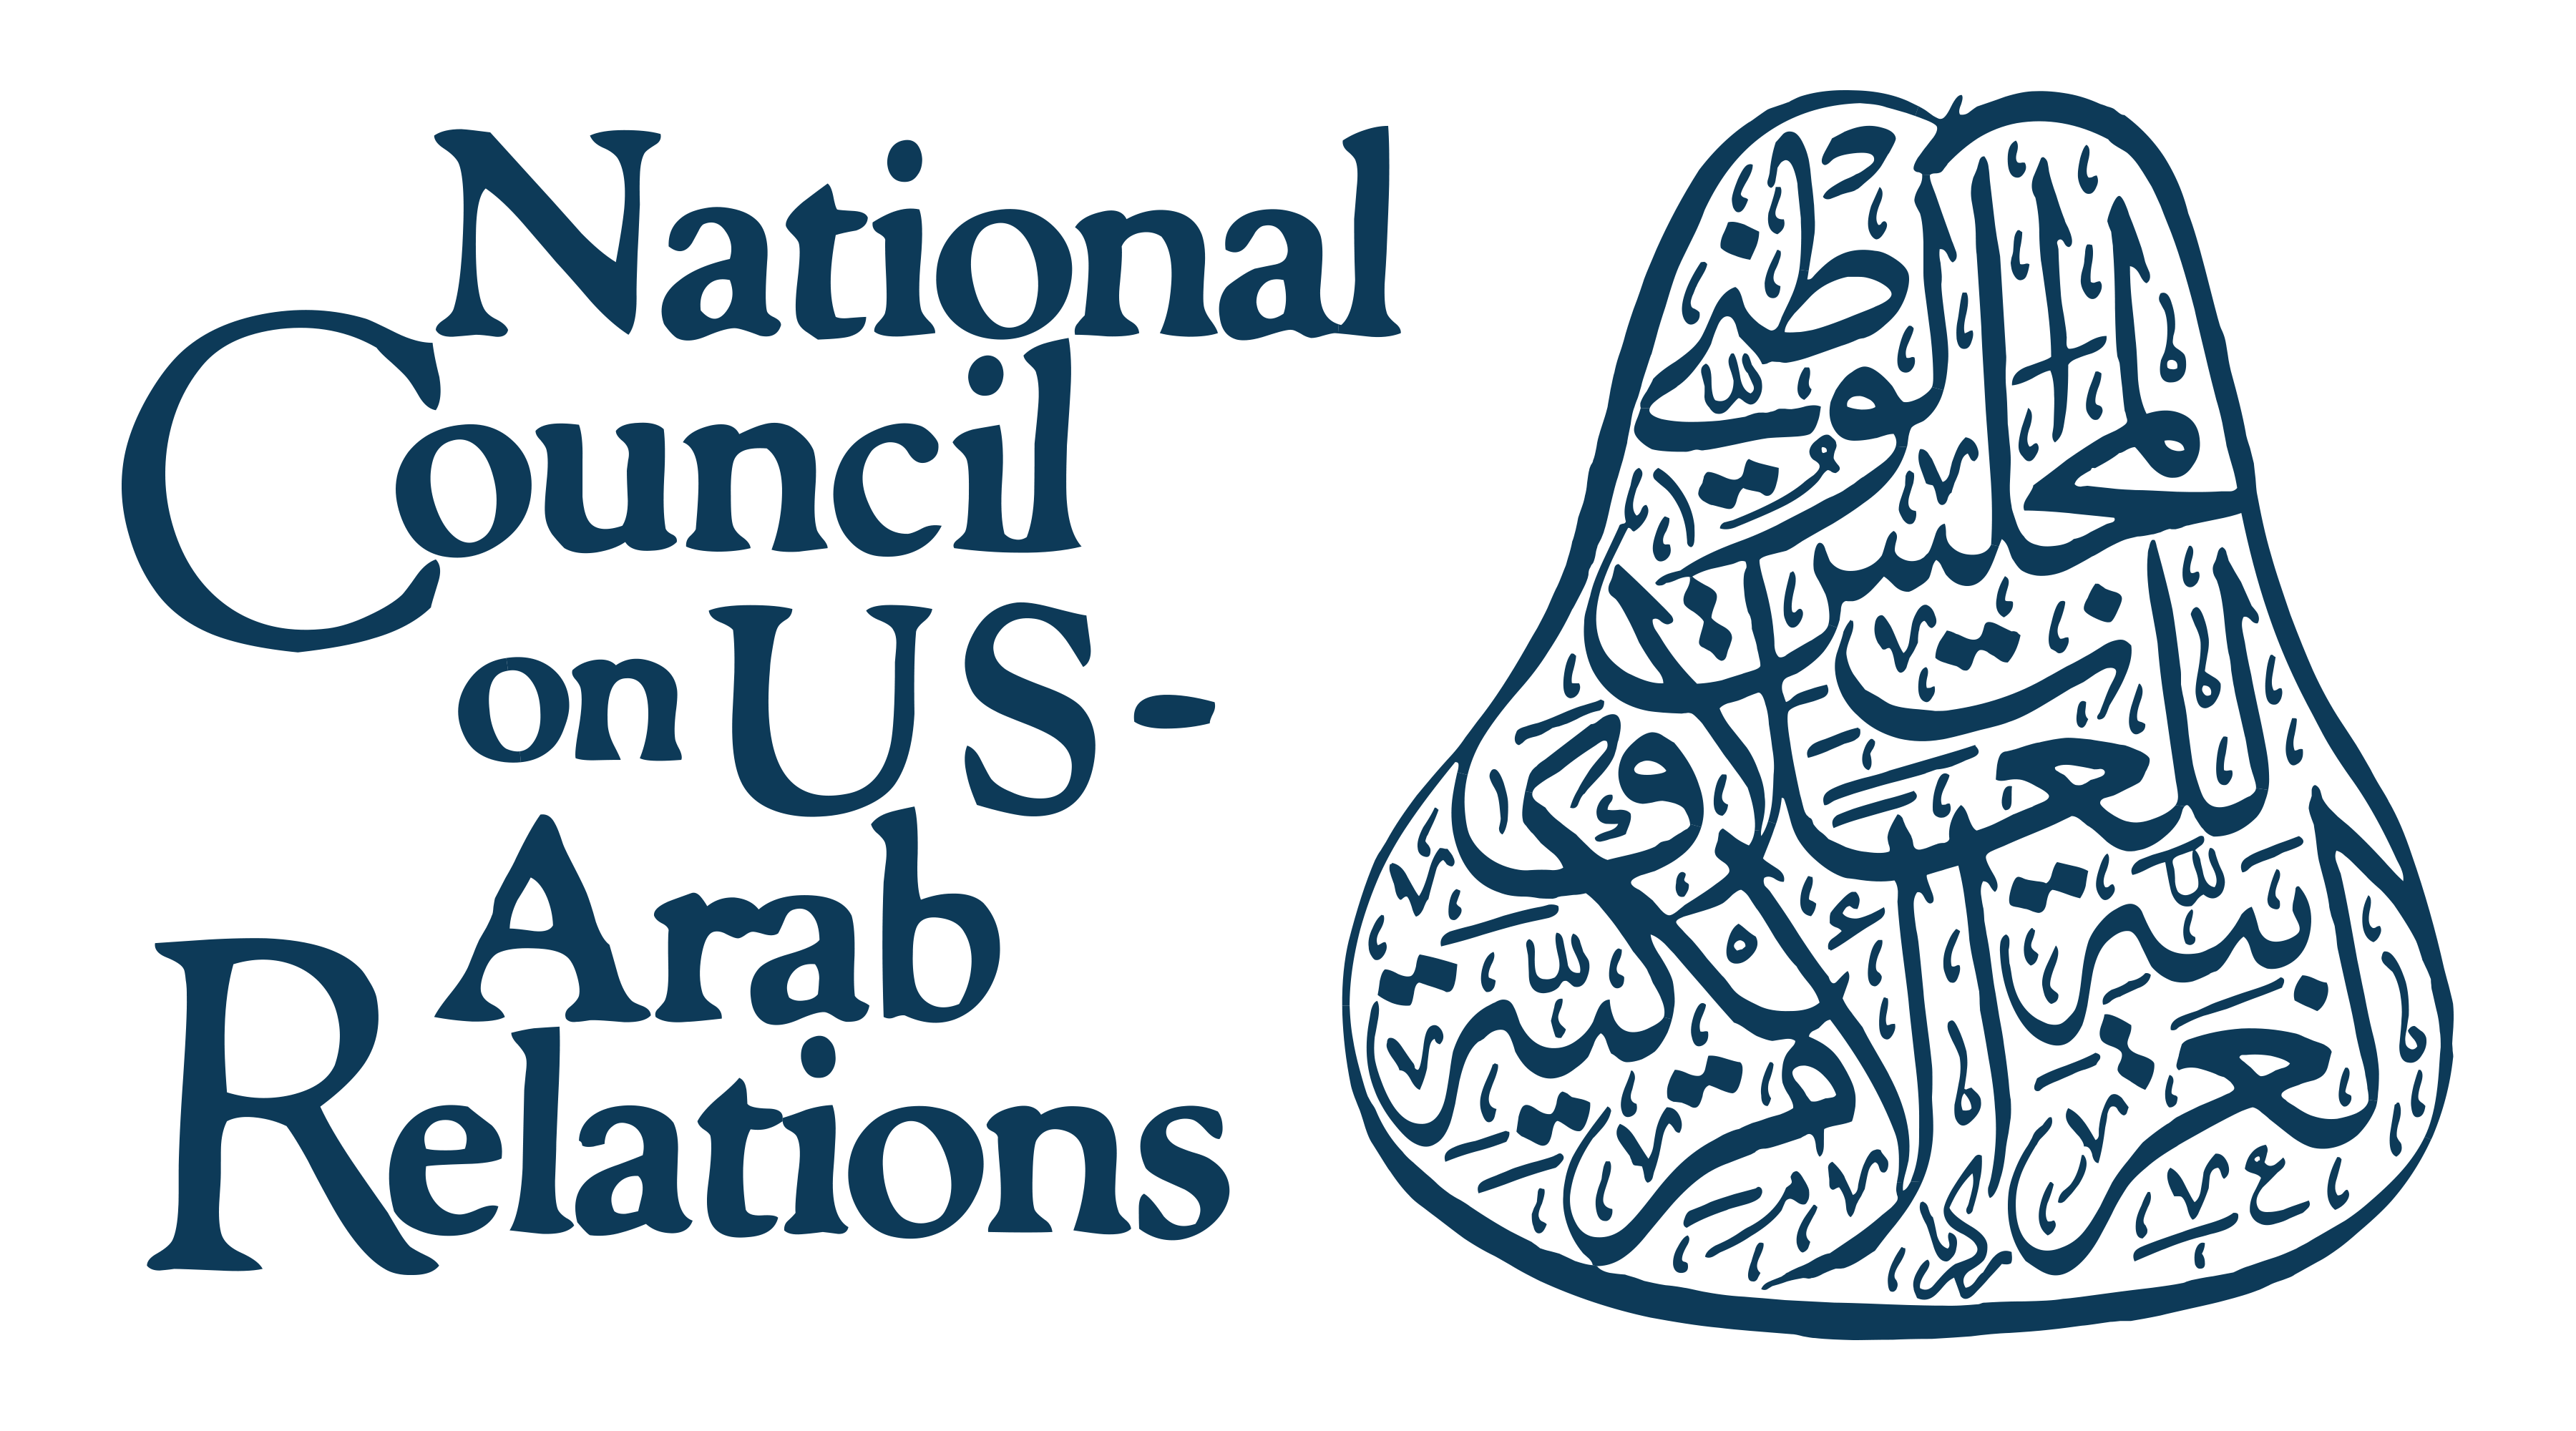 National Council on U.S.-Arab Relations